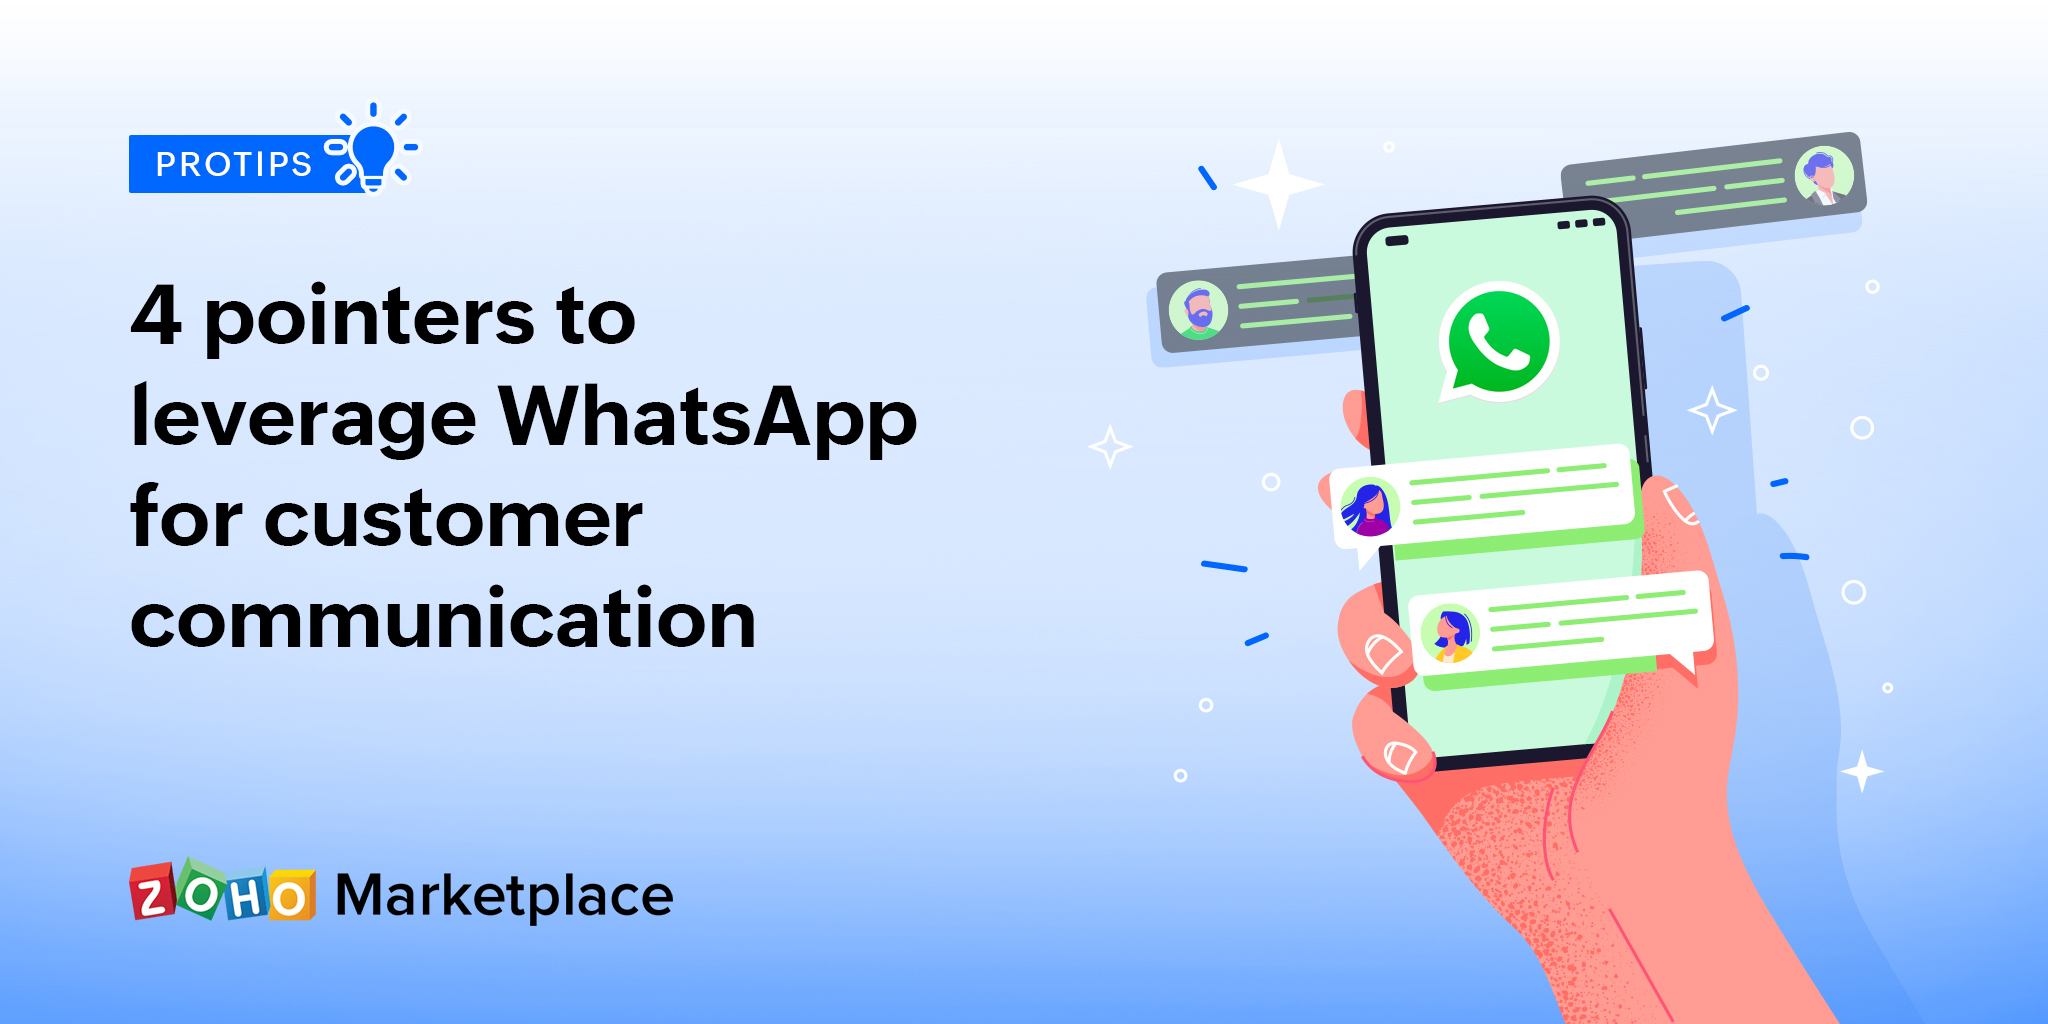 ProTips: 4 pointers to leverage WhatsApp for customer communication